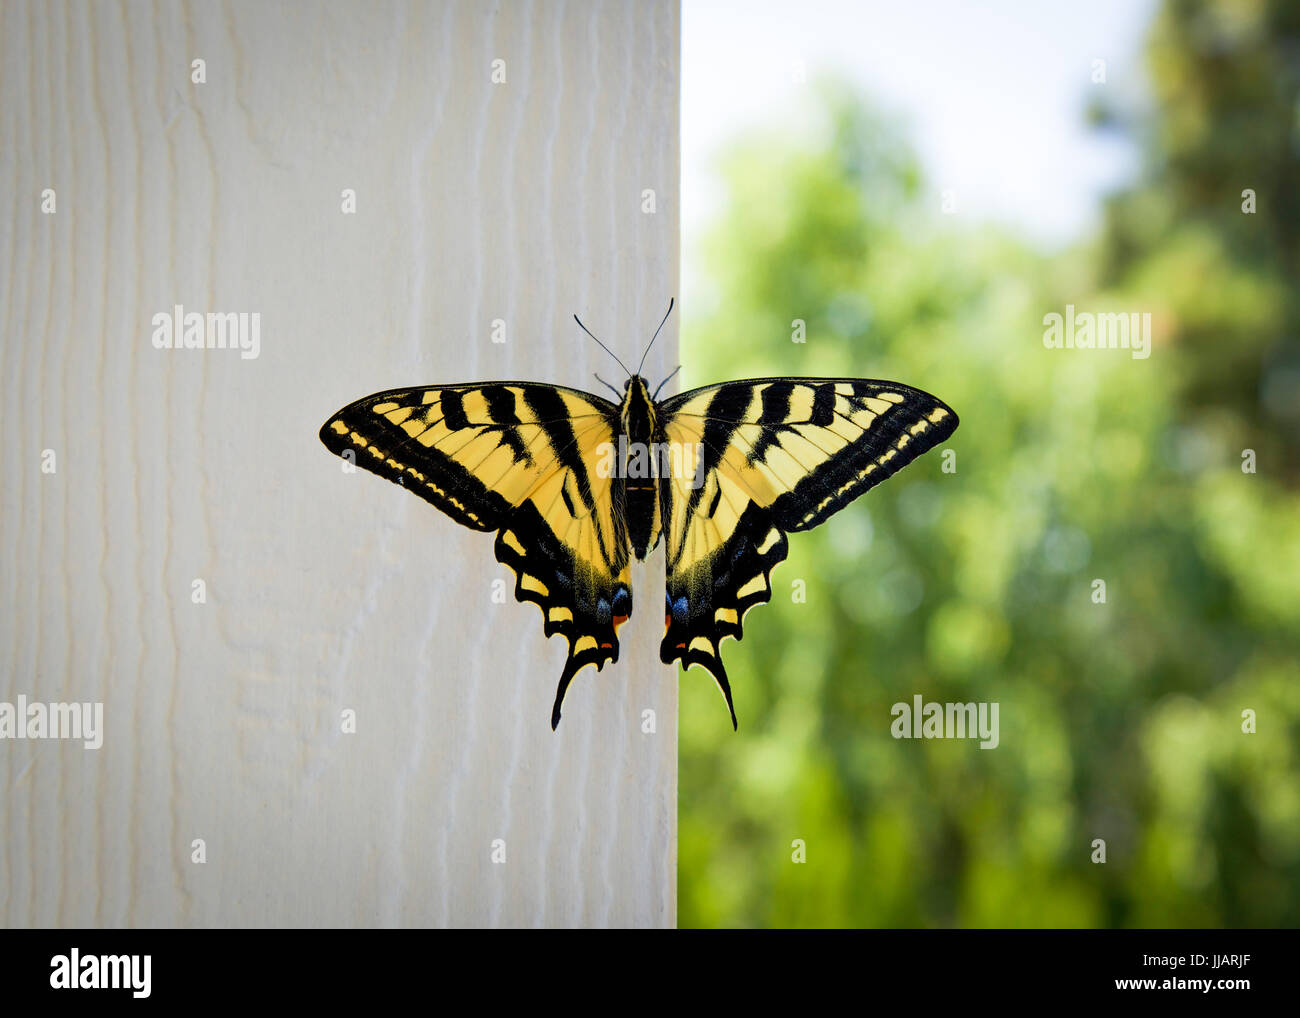 Western Tiger Swallowtail Butterfly Stock Photo